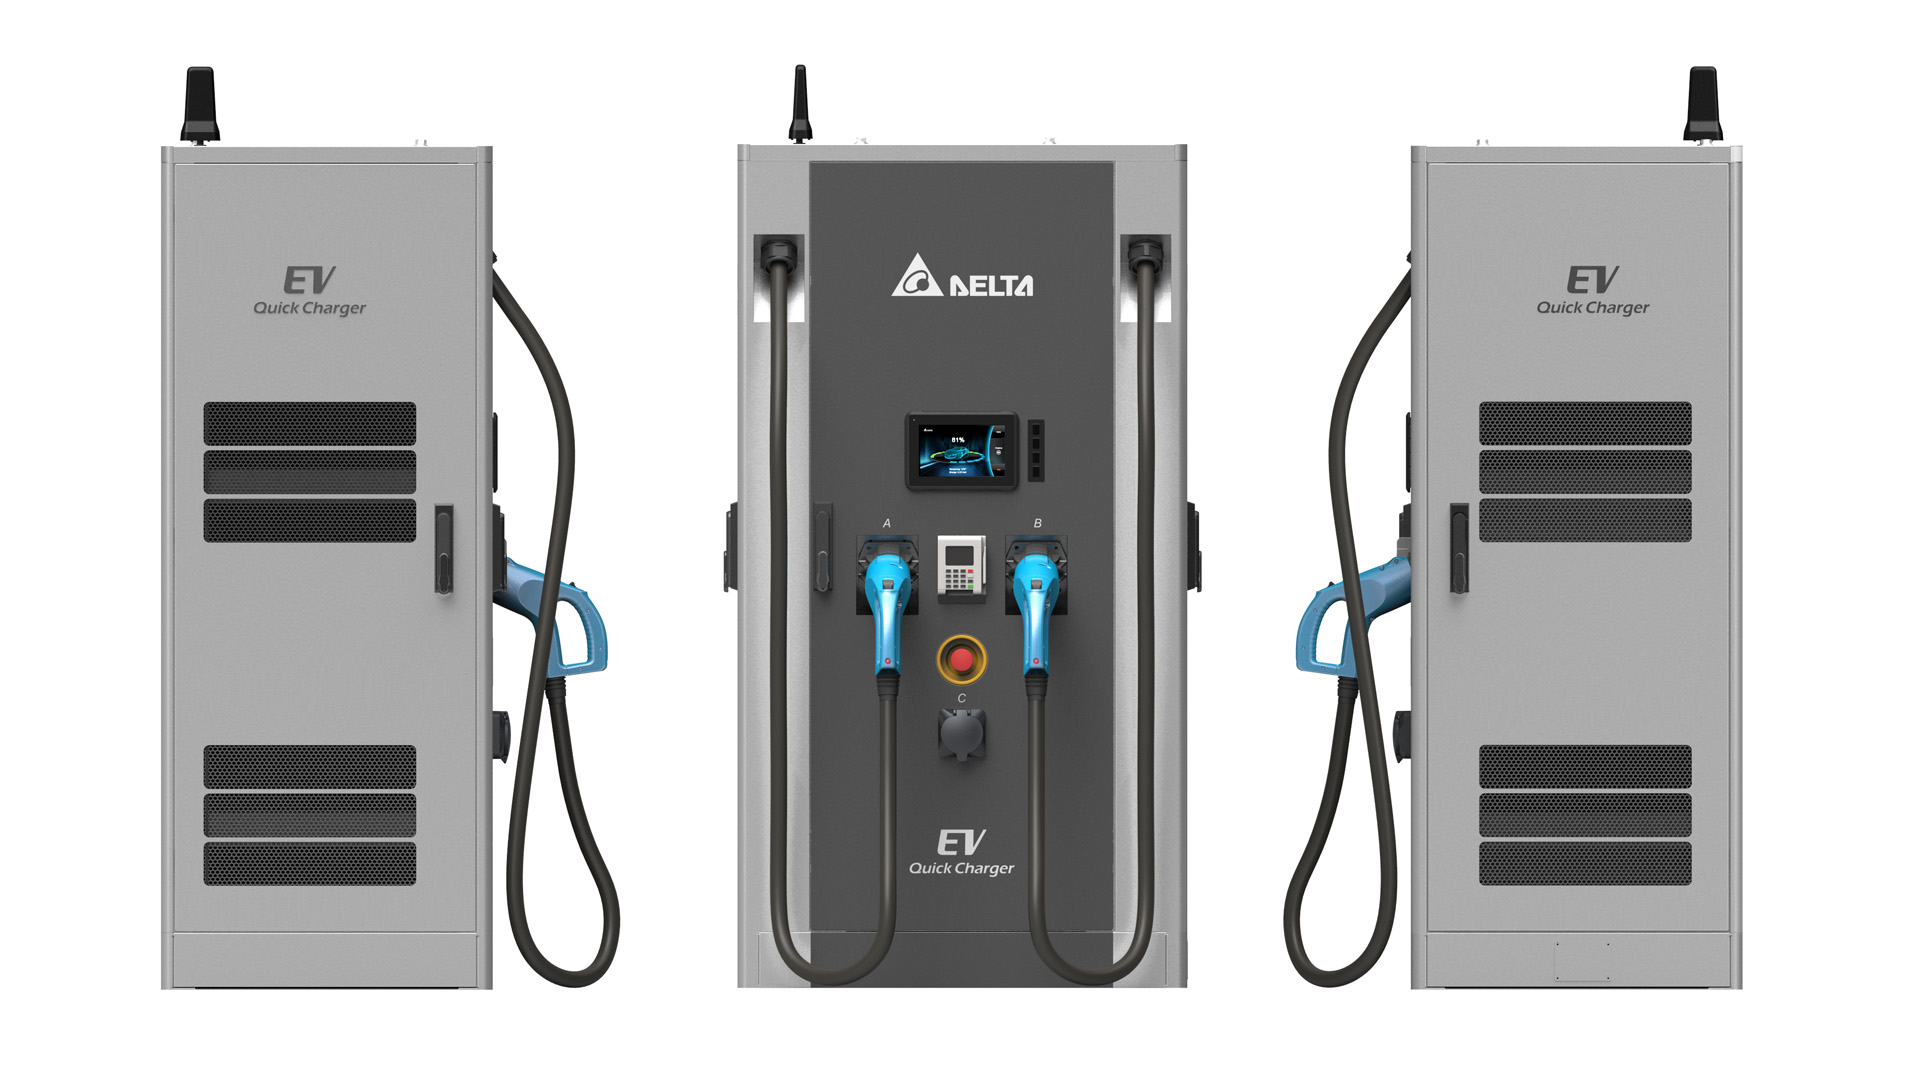 Delta's Showcases New HighEfficiency Solutions for EV Charging at